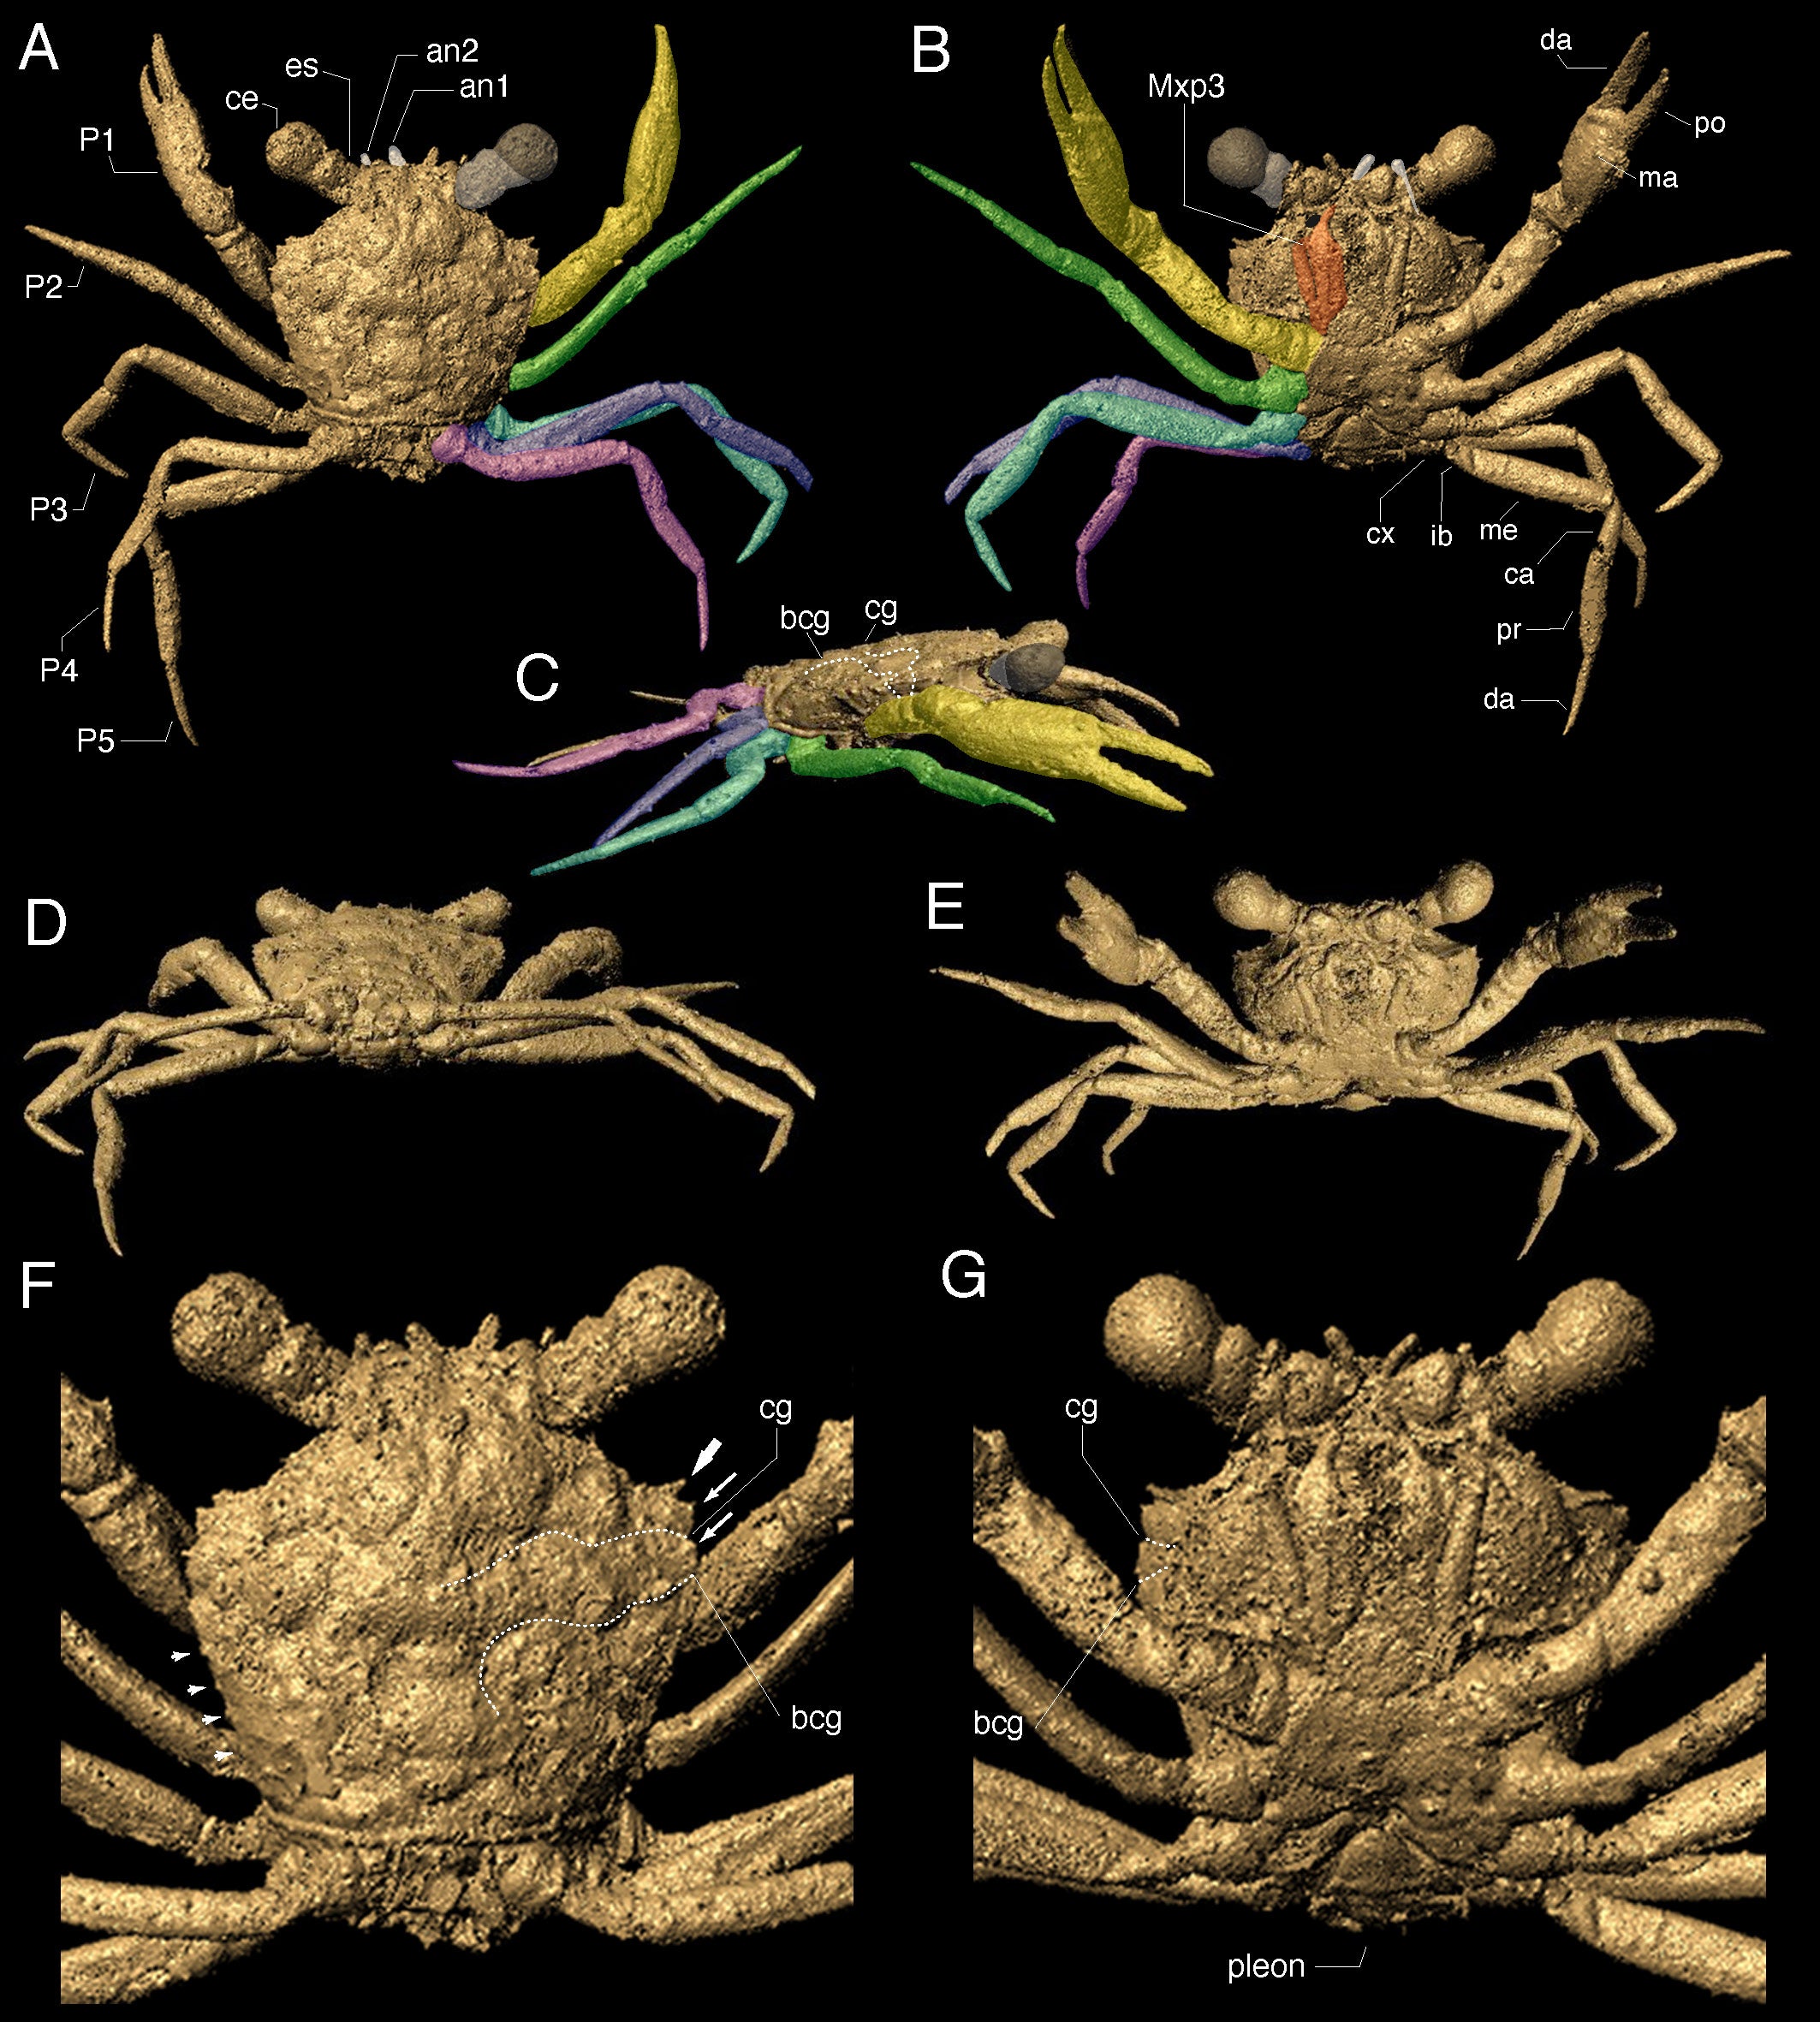 3D scans of the fossil, showing the crab in exquisite detail.  (Image: Elizabeth Clark and Javier Luque)